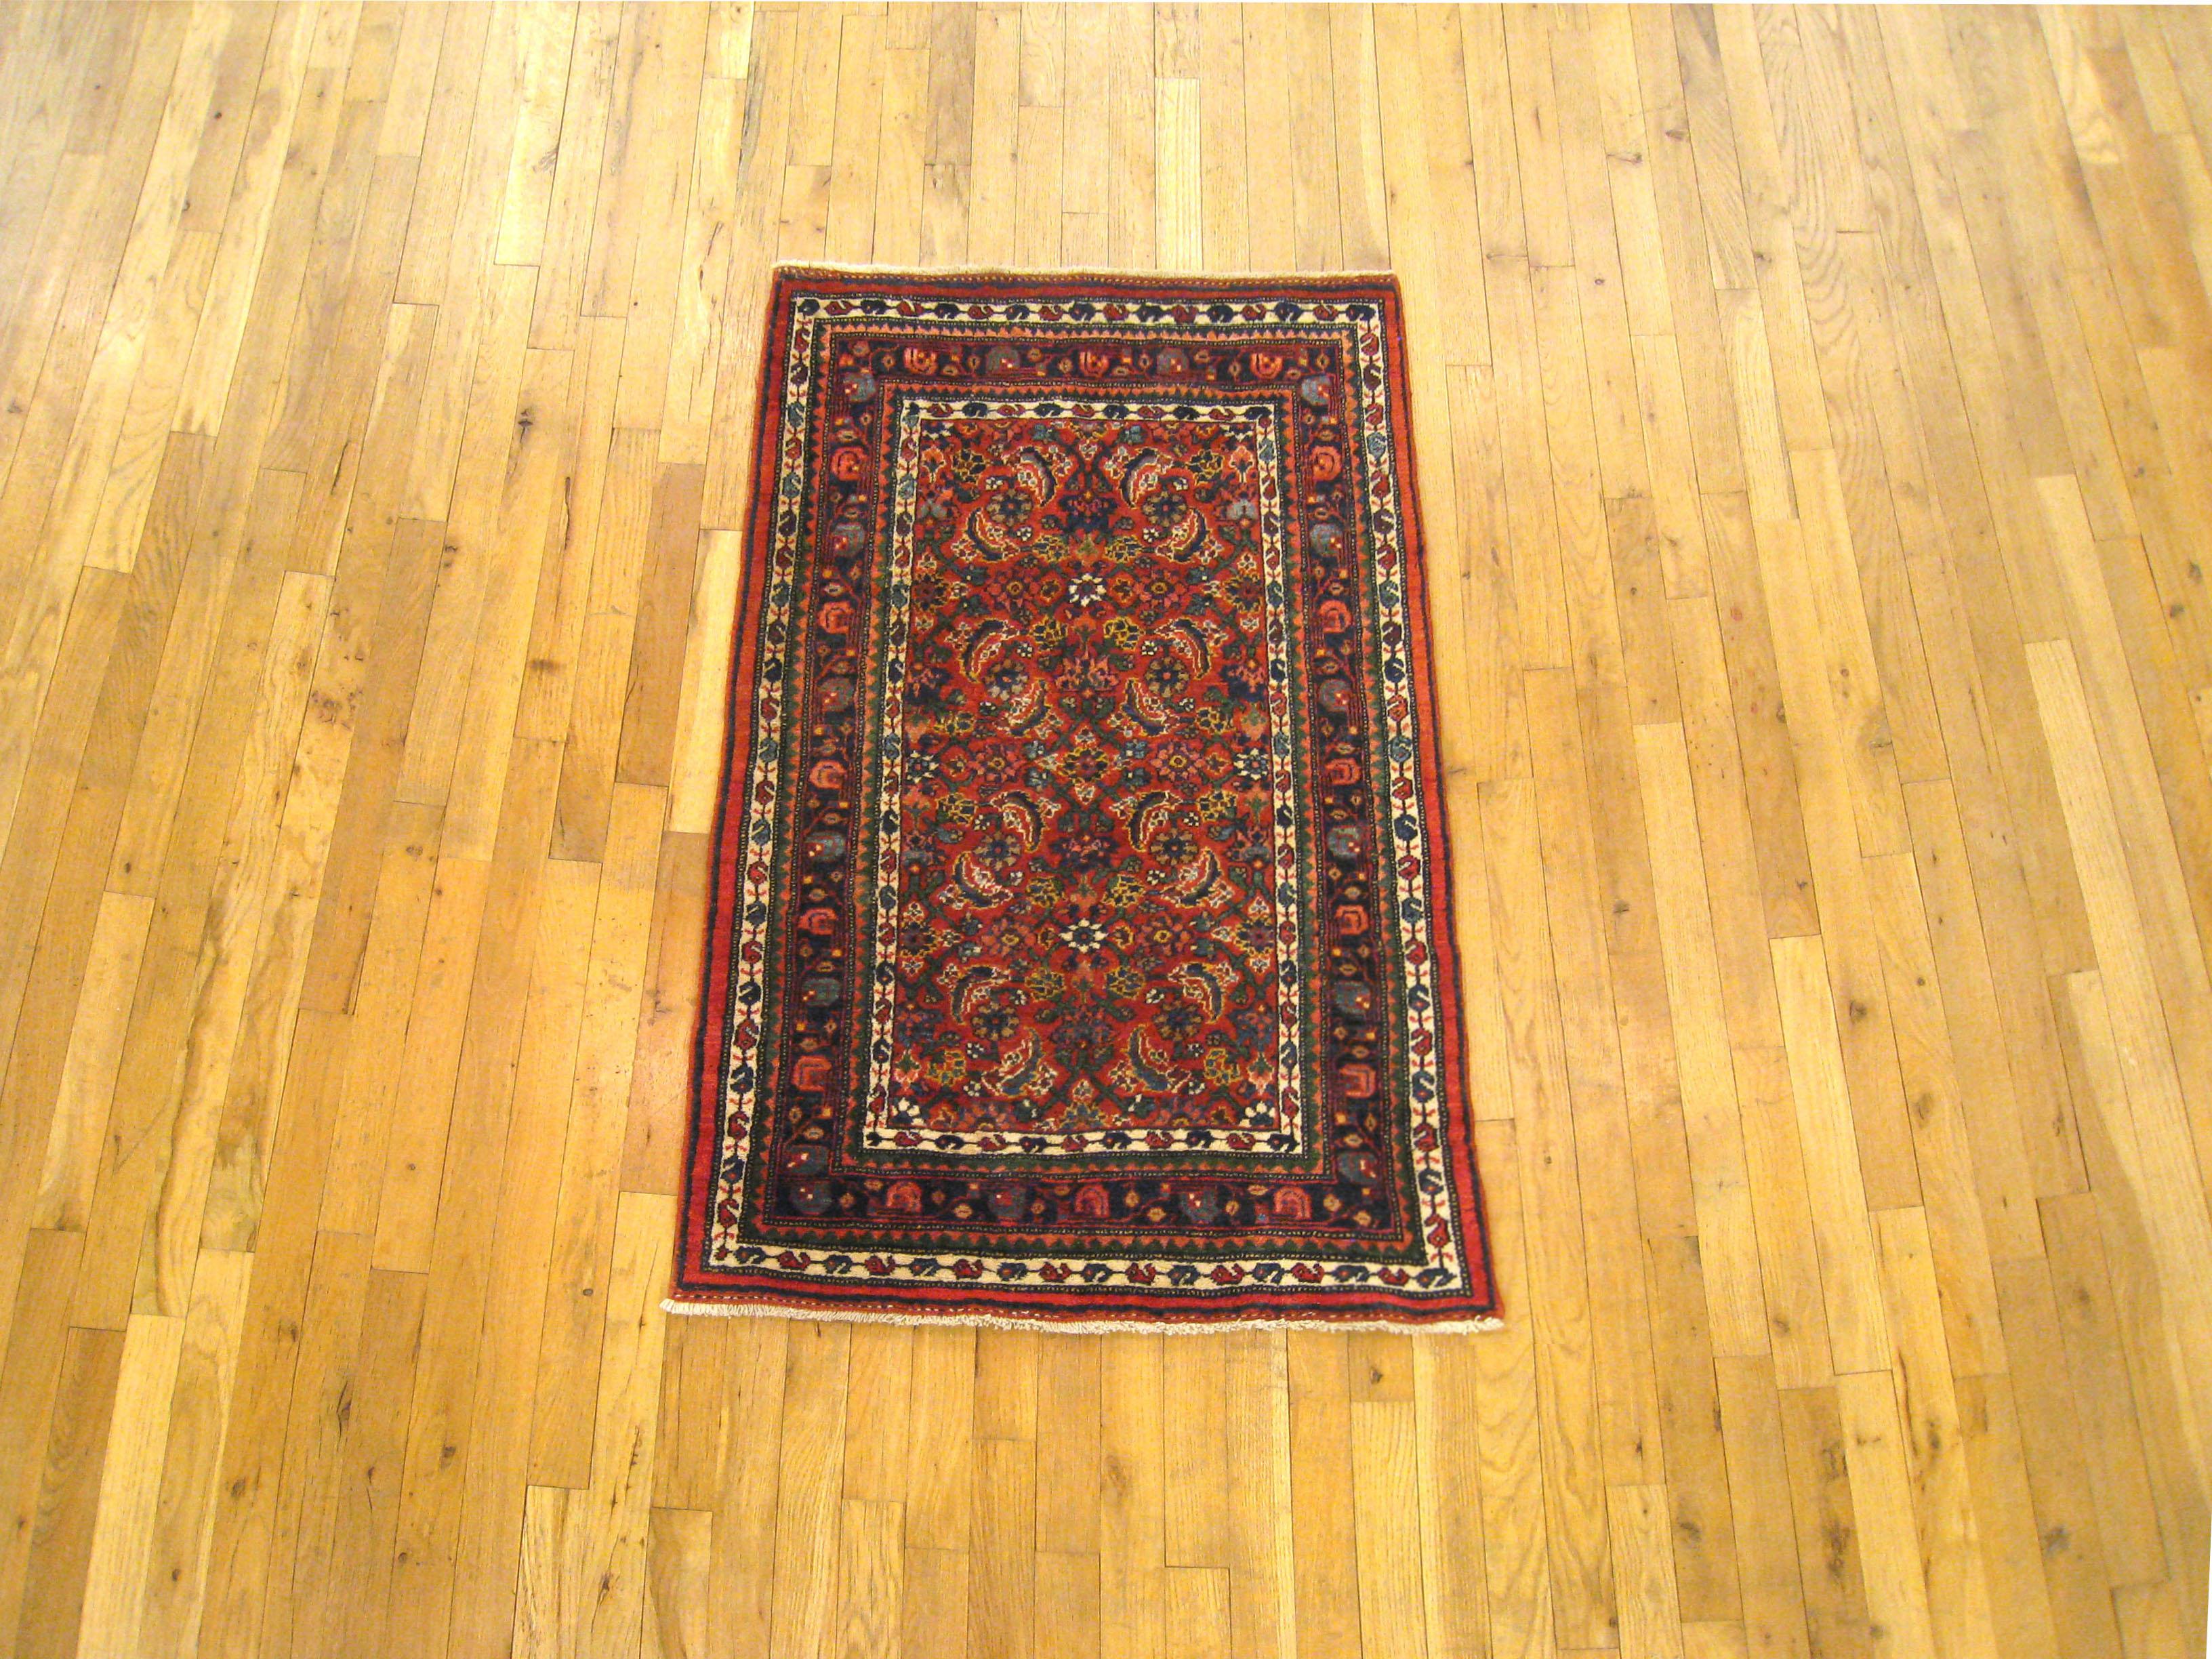 An antique Persian Bidjar oriental rug, size 4'1 x 2'7, circa 1920. This sturdy hand-knotted wool carpet features a stylized Herati design in the central plane, which is enclosed within a handsome dark blue primary border. This densely woven rug is